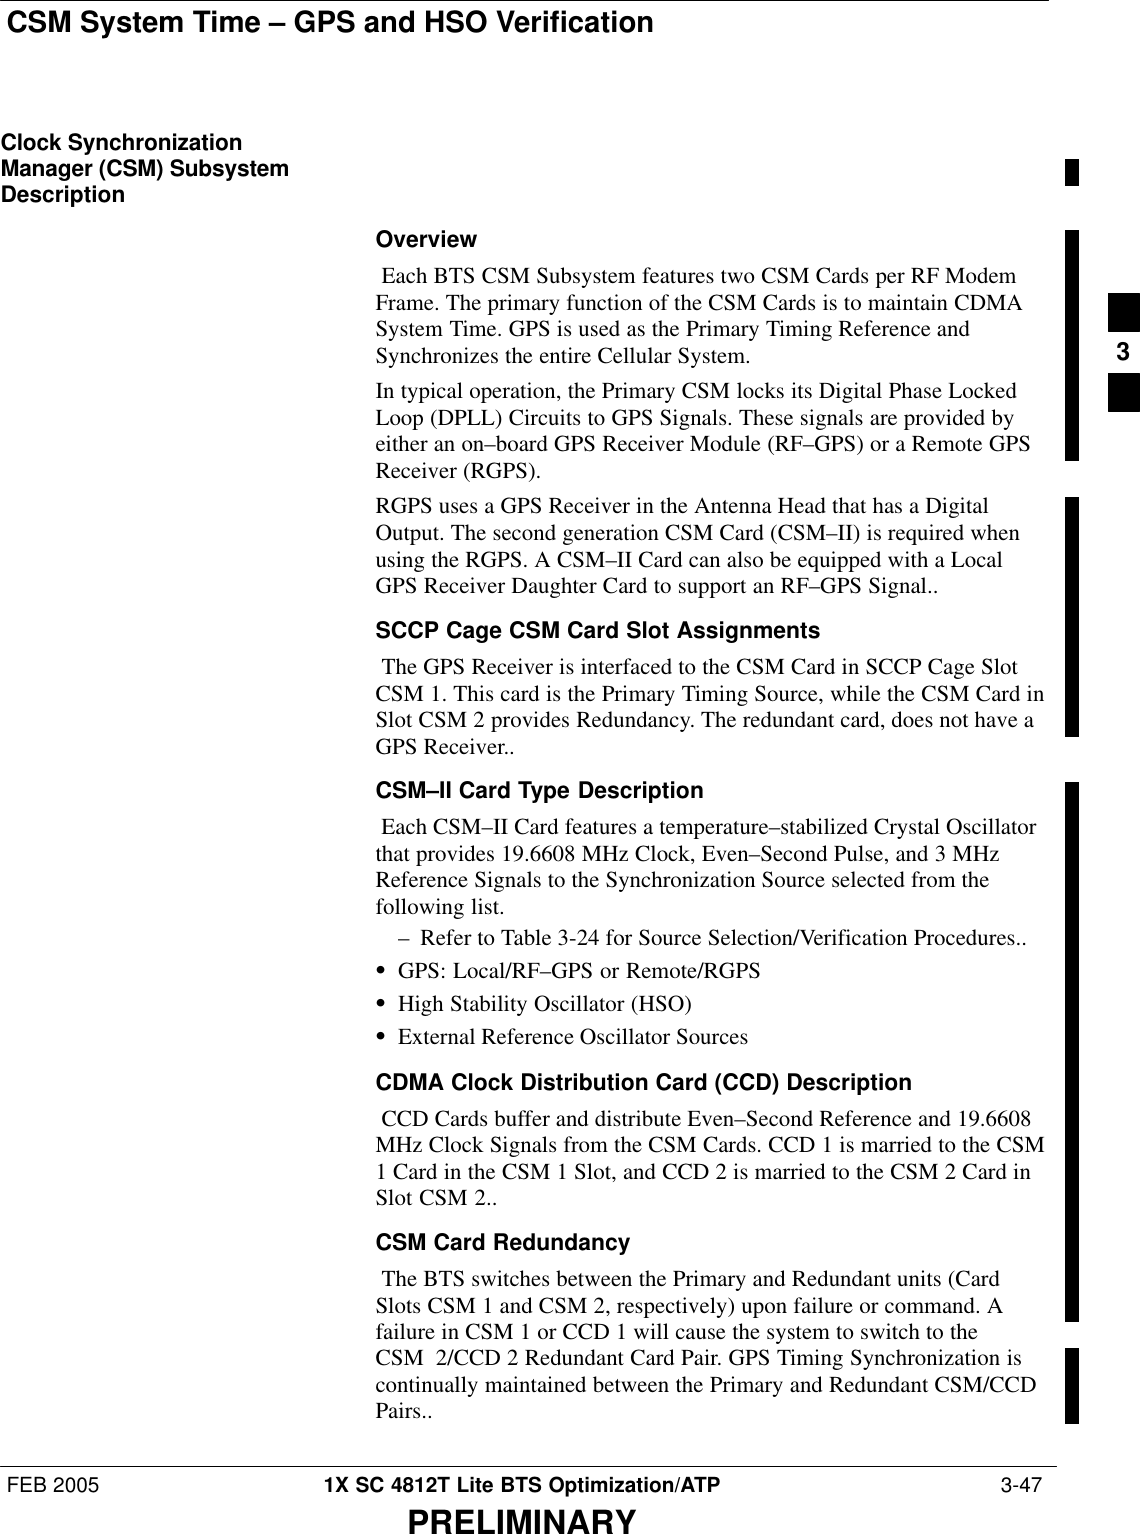 CSM System Time – GPS and HSO VerificationFEB 2005 1X SC 4812T Lite BTS Optimization/ATP  3-47PRELIMINARYClock SynchronizationManager (CSM) SubsystemDescriptionOverview Each BTS CSM Subsystem features two CSM Cards per RF ModemFrame. The primary function of the CSM Cards is to maintain CDMASystem Time. GPS is used as the Primary Timing Reference andSynchronizes the entire Cellular System. In typical operation, the Primary CSM locks its Digital Phase LockedLoop (DPLL) Circuits to GPS Signals. These signals are provided byeither an on–board GPS Receiver Module (RF–GPS) or a Remote GPSReceiver (RGPS). RGPS uses a GPS Receiver in the Antenna Head that has a DigitalOutput. The second generation CSM Card (CSM–II) is required whenusing the RGPS. A CSM–II Card can also be equipped with a LocalGPS Receiver Daughter Card to support an RF–GPS Signal..SCCP Cage CSM Card Slot Assignments The GPS Receiver is interfaced to the CSM Card in SCCP Cage SlotCSM 1. This card is the Primary Timing Source, while the CSM Card inSlot CSM 2 provides Redundancy. The redundant card, does not have aGPS Receiver..CSM–II Card Type Description Each CSM–II Card features a temperature–stabilized Crystal Oscillatorthat provides 19.6608 MHz Clock, Even–Second Pulse, and 3 MHzReference Signals to the Synchronization Source selected from thefollowing list. – Refer to Table 3-24 for Source Selection/Verification Procedures..SGPS: Local/RF–GPS or Remote/RGPSSHigh Stability Oscillator (HSO)SExternal Reference Oscillator SourcesCDMA Clock Distribution Card (CCD) Description CCD Cards buffer and distribute Even–Second Reference and 19.6608MHz Clock Signals from the CSM Cards. CCD 1 is married to the CSM1 Card in the CSM 1 Slot, and CCD 2 is married to the CSM 2 Card inSlot CSM 2..CSM Card Redundancy The BTS switches between the Primary and Redundant units (CardSlots CSM 1 and CSM 2, respectively) upon failure or command. Afailure in CSM 1 or CCD 1 will cause the system to switch to theCSM 2/CCD 2 Redundant Card Pair. GPS Timing Synchronization iscontinually maintained between the Primary and Redundant CSM/CCDPairs..3